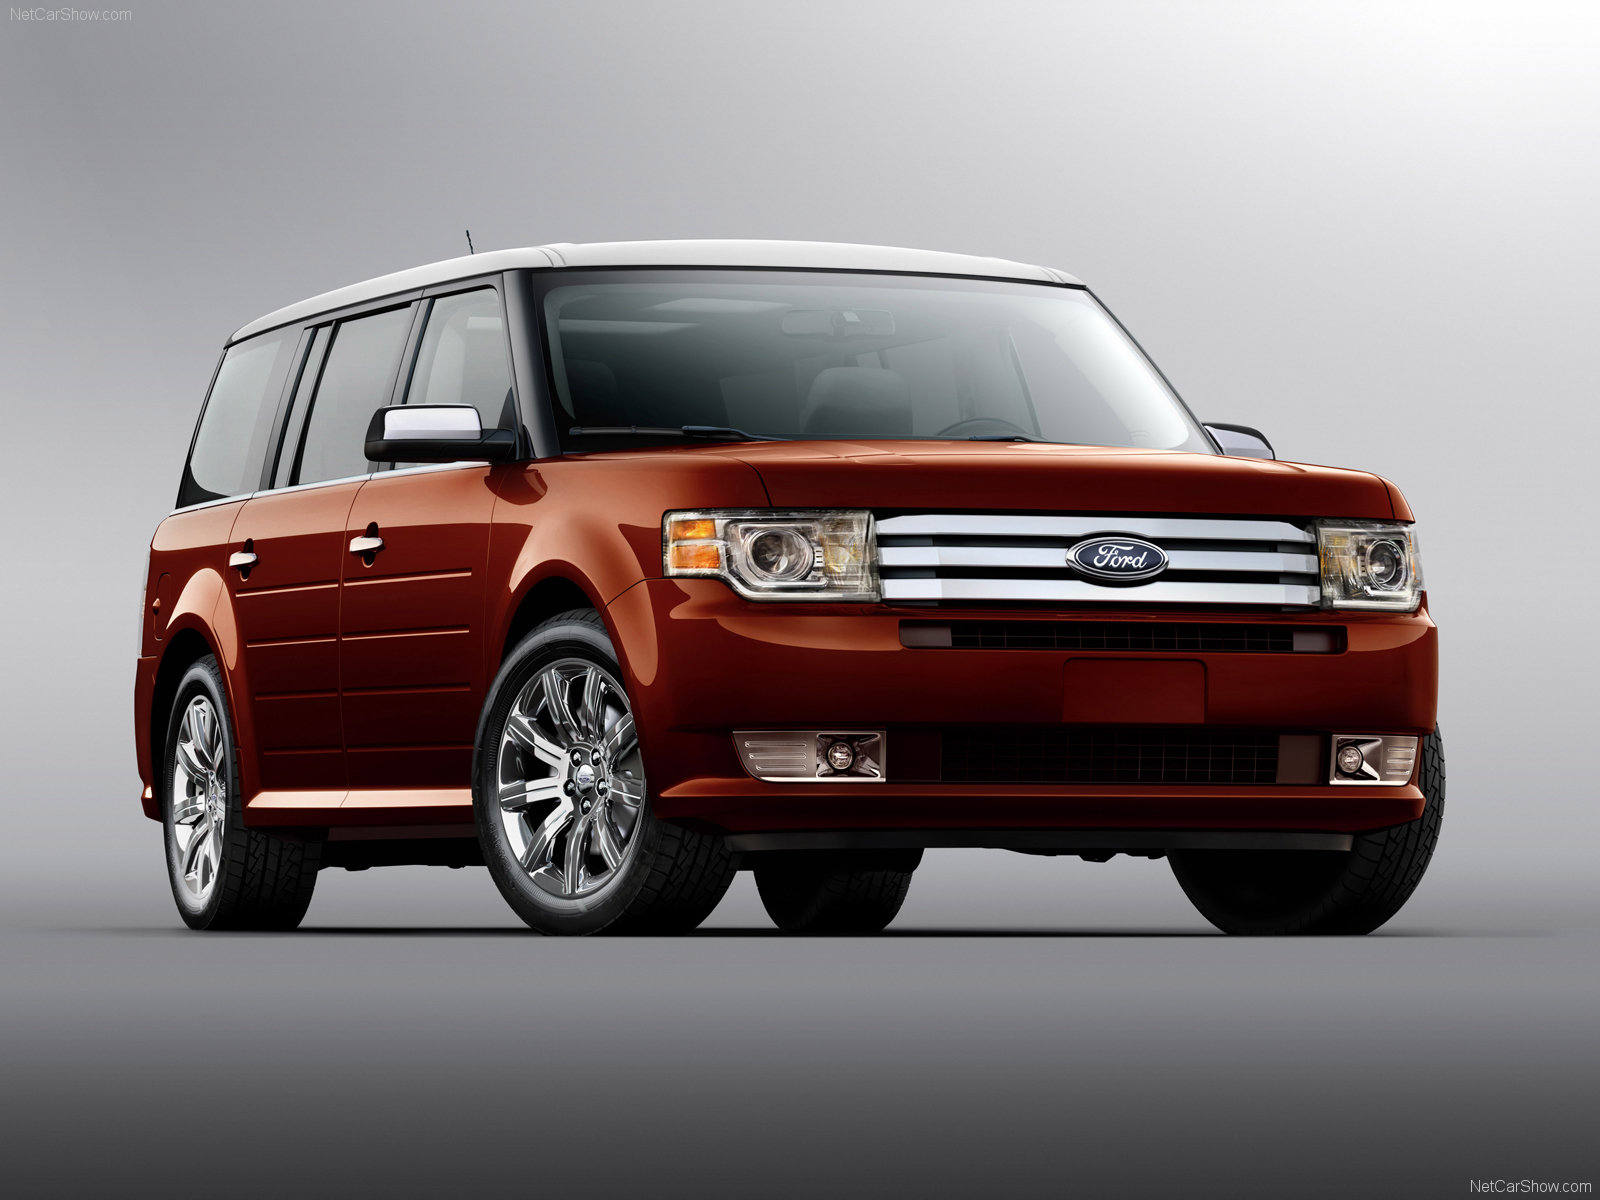 temple-hills-ford-flex-for-sale-used-make-ford-flex-trucks-suv-s-for